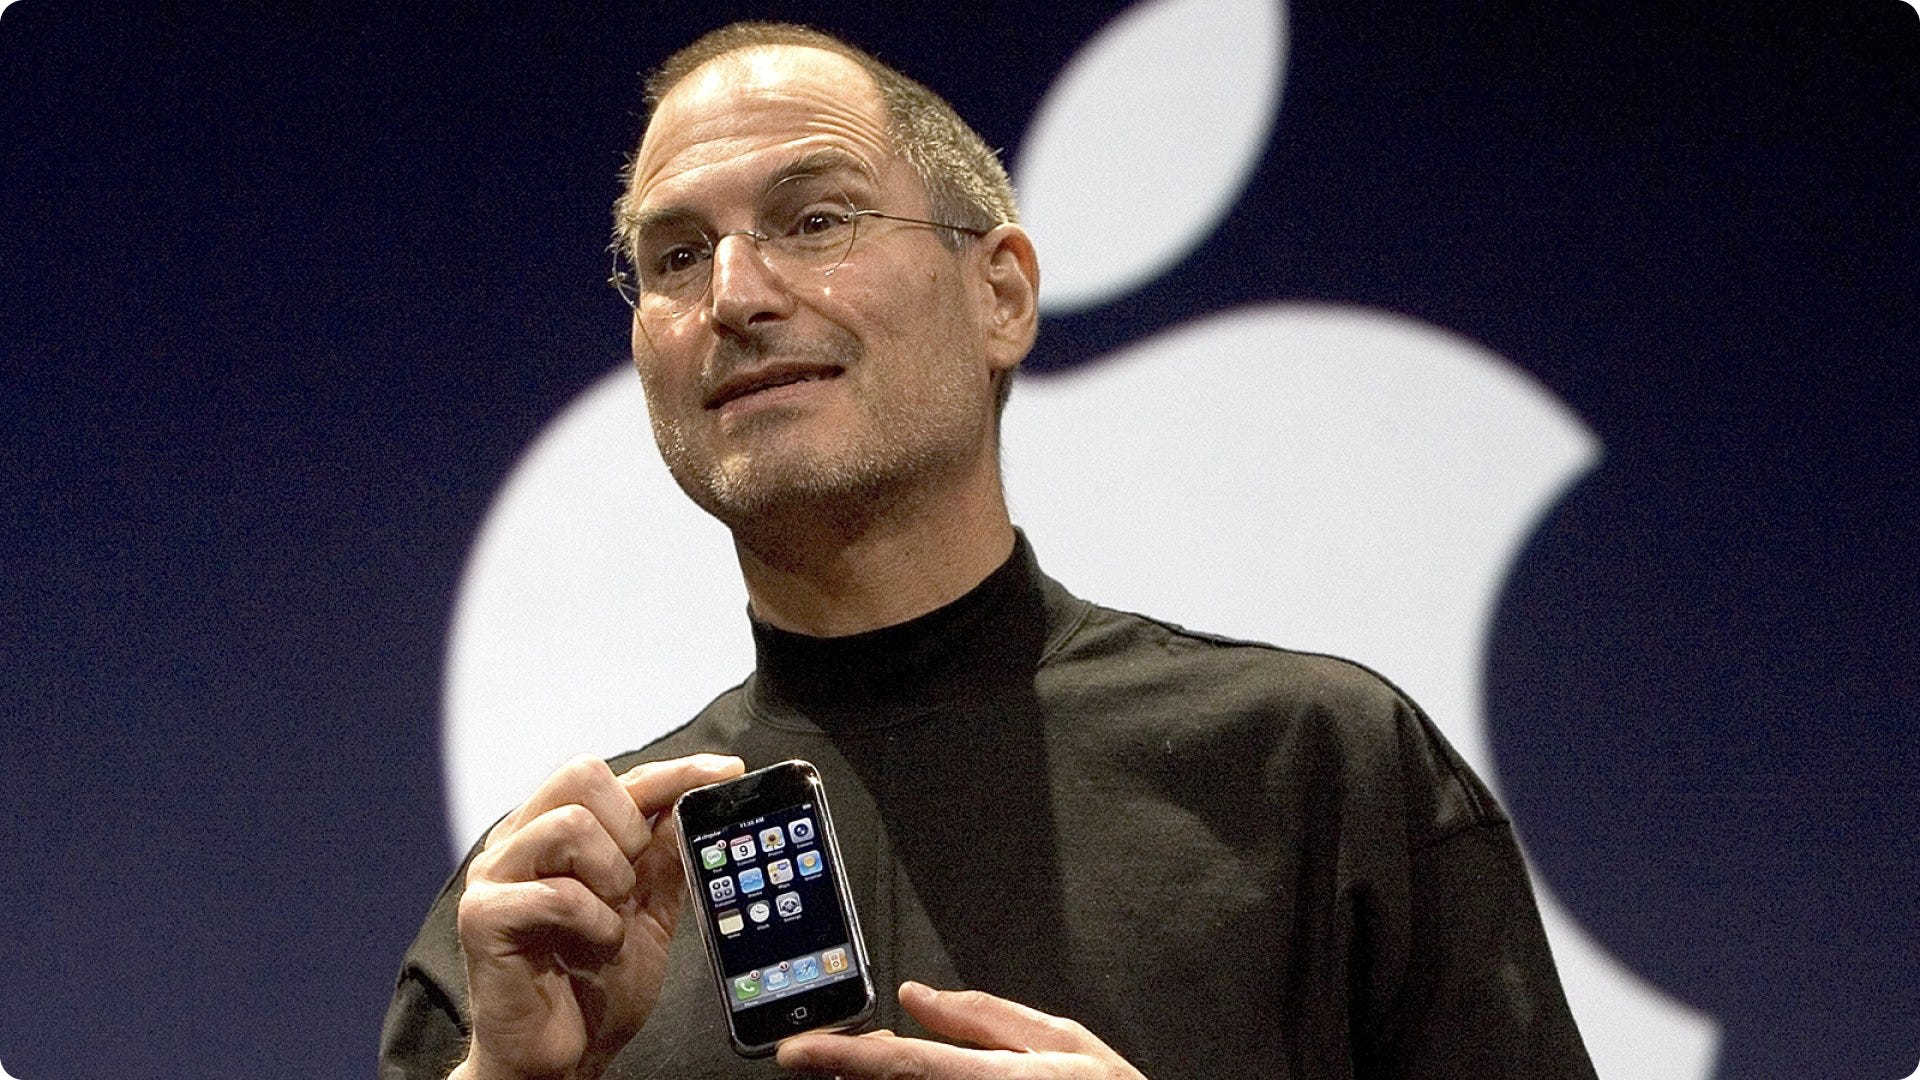 Steve Jobs with the iPhone